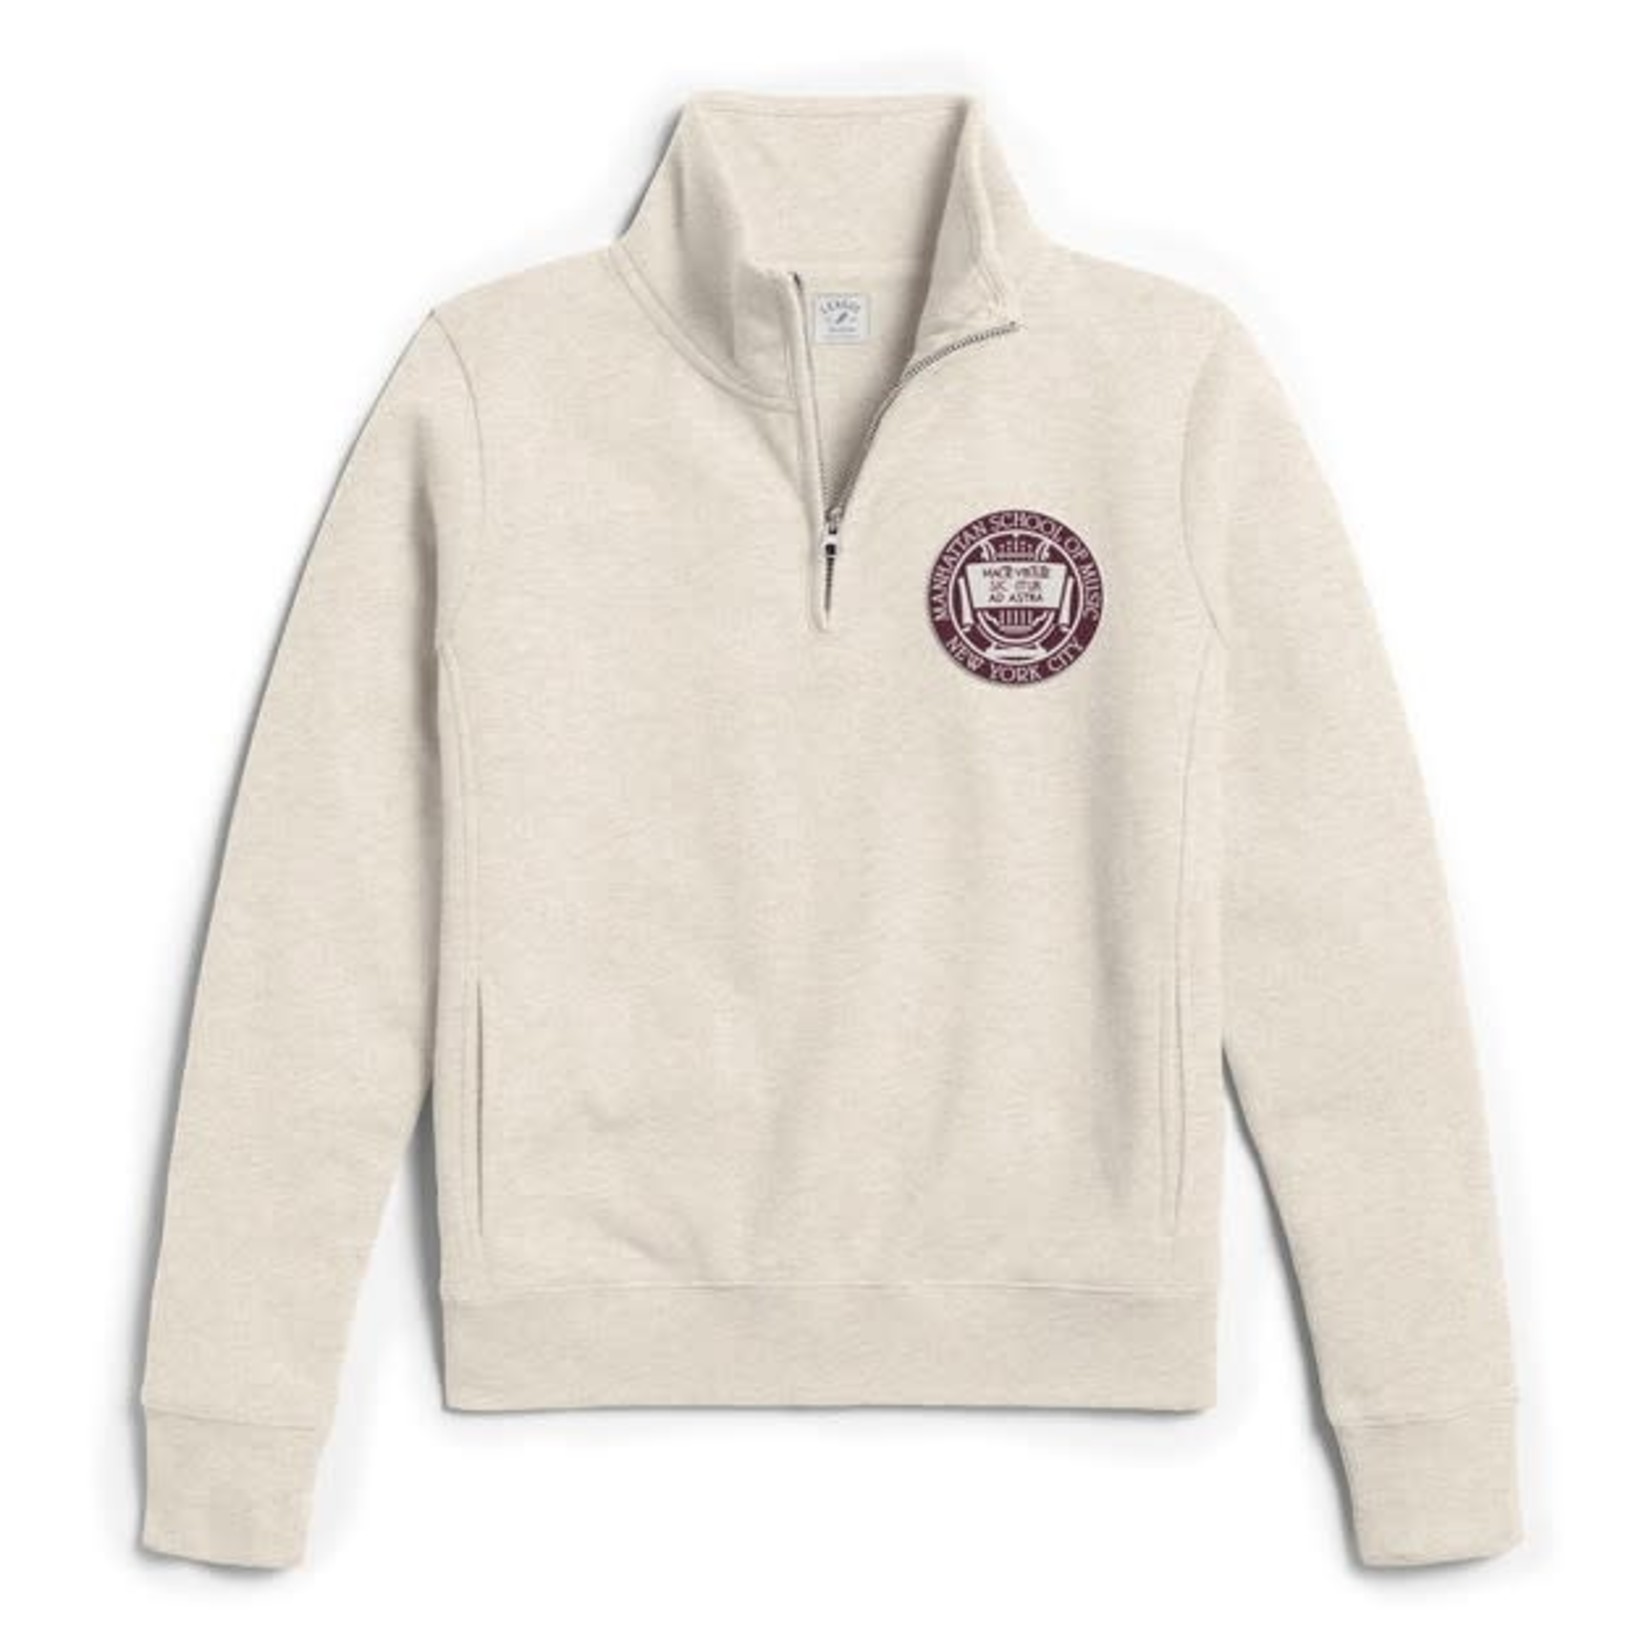 sweatshirt: League ladies cut oatmeal 1/4 zip with embroidered seal